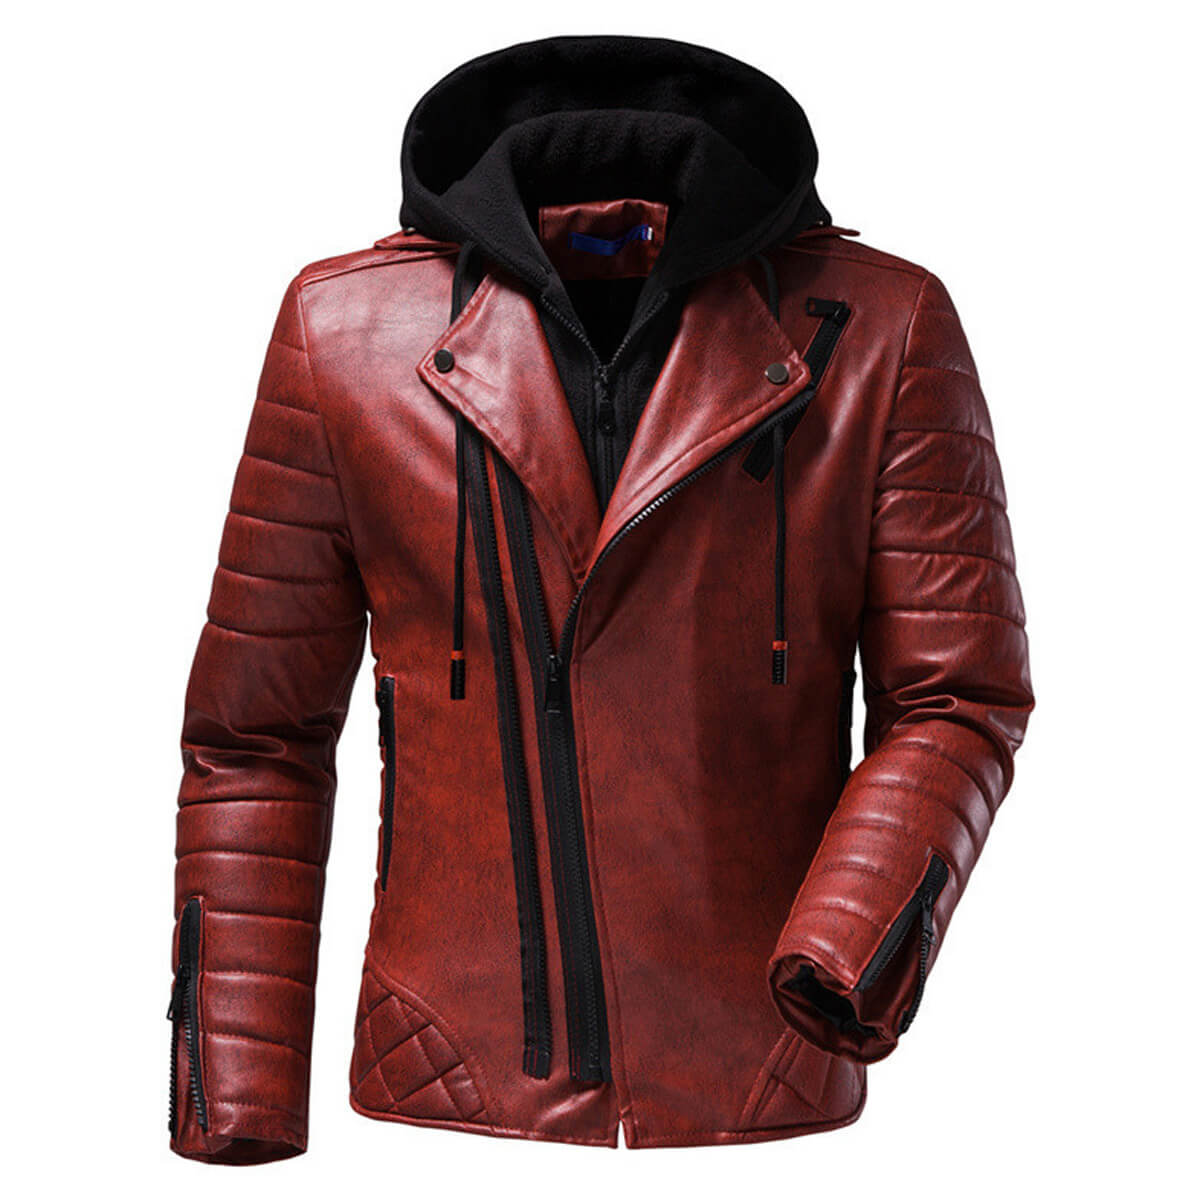 Men’s Vintage Distressed Maroon Biker Genuine Sheepskin Lapel Collar Hooded Motorcycle Rider Crossover Retro Quilted Asymmetric Leather Jacket - Front View - AceCart